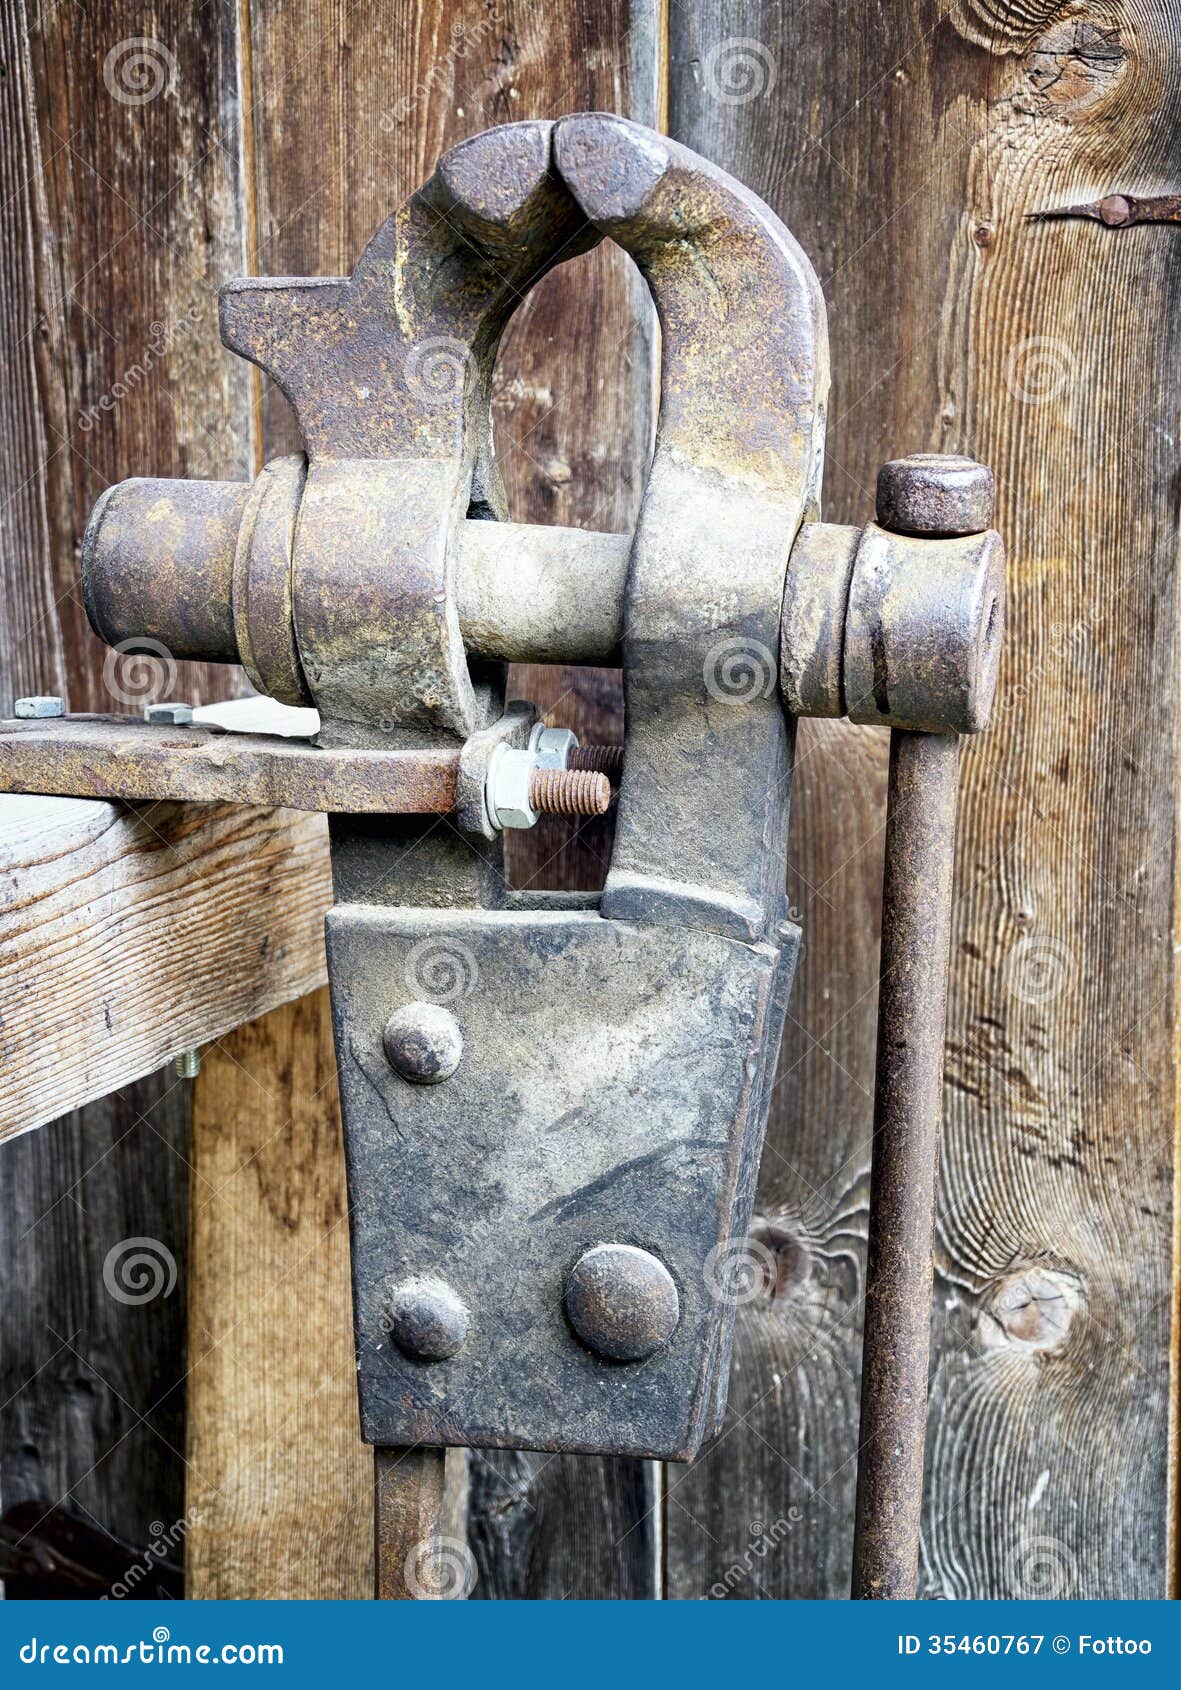 Old bench vise stock image. Image of revival, brown 